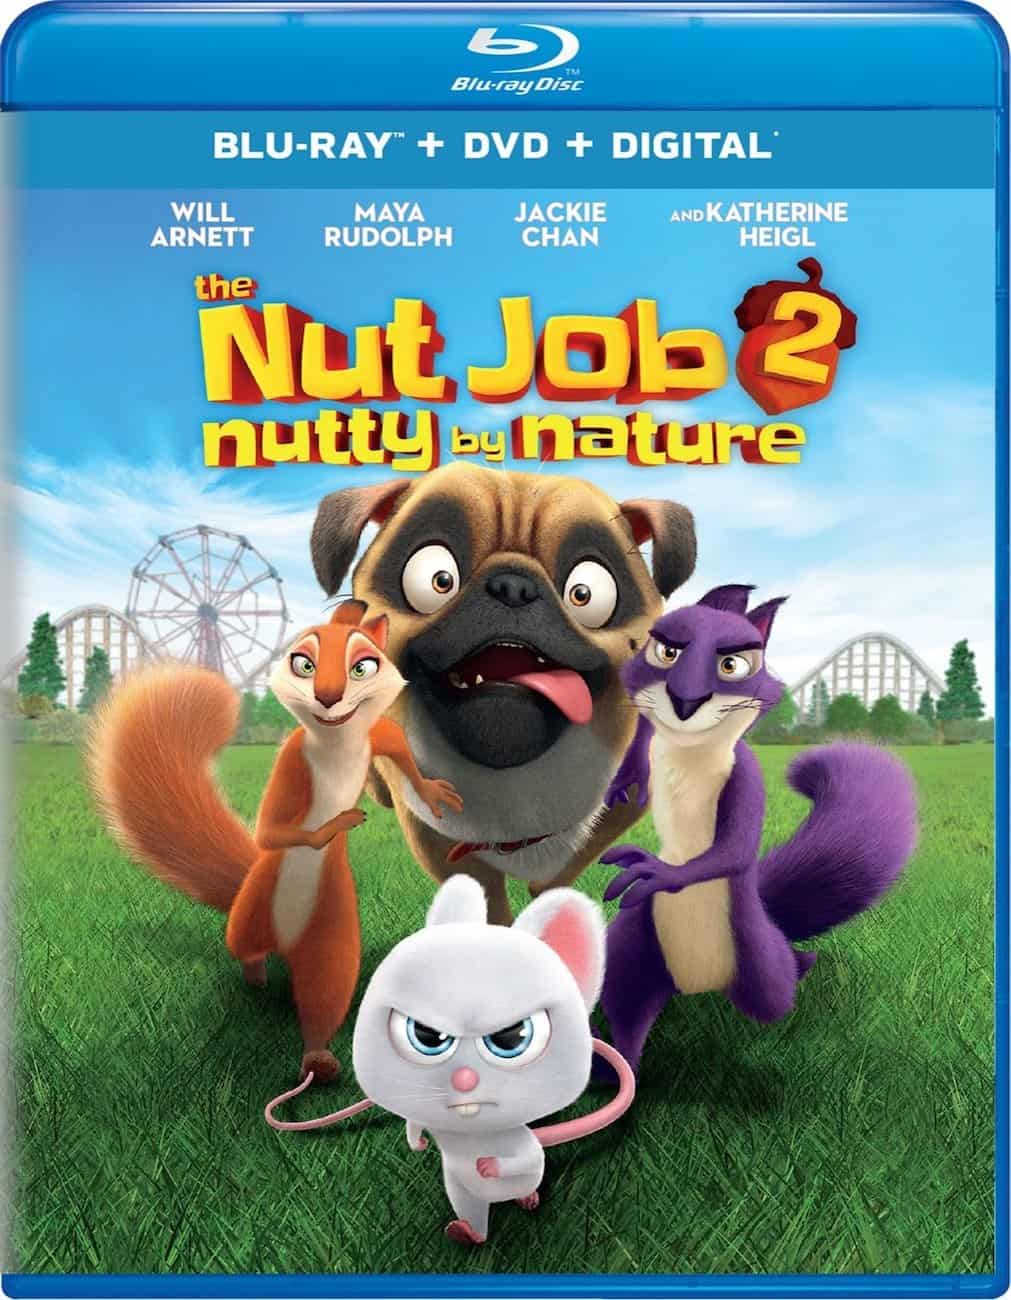 The Nut job 2 review